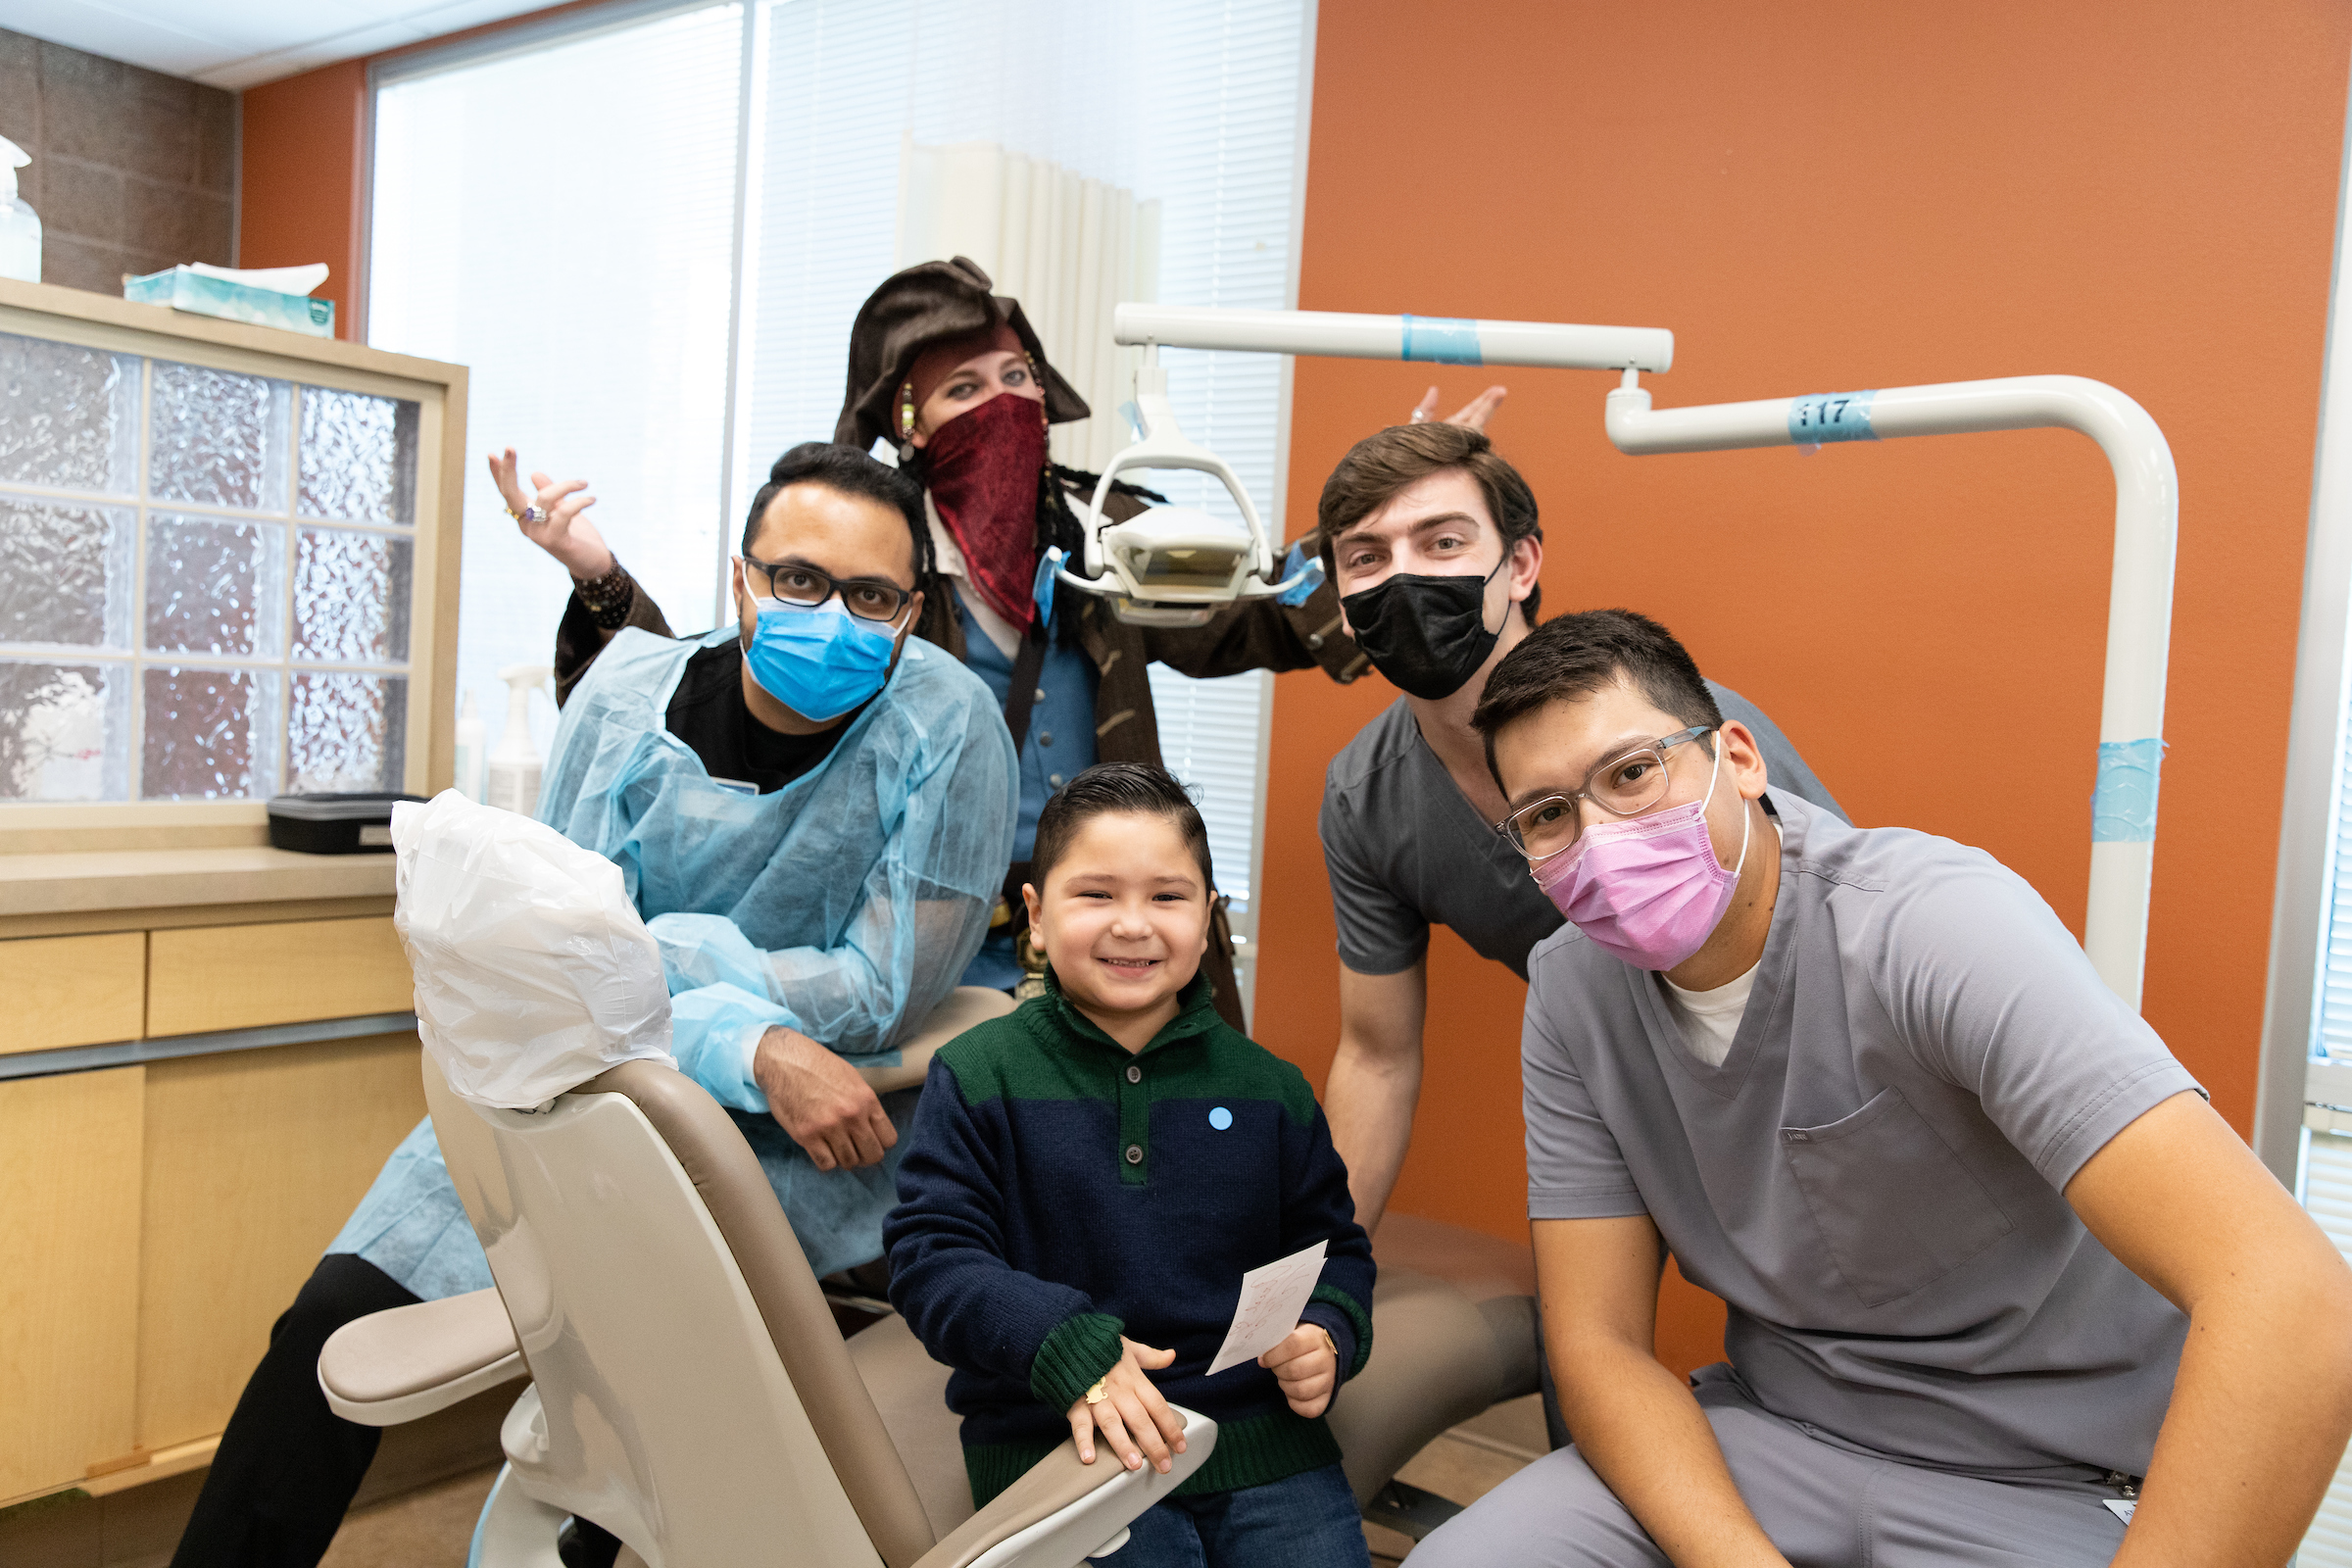 A.T. Still University’s Arizona School of Dentistry & Oral Health (ATSU-ASDOH) and the Arizona Dental Foundation provided free dental care to more than 300 uninsured and at-risk children during the annual Give Kids A Smile event Feb. 18, 2022, at the University’s Mesa, Arizona, dental clinic.